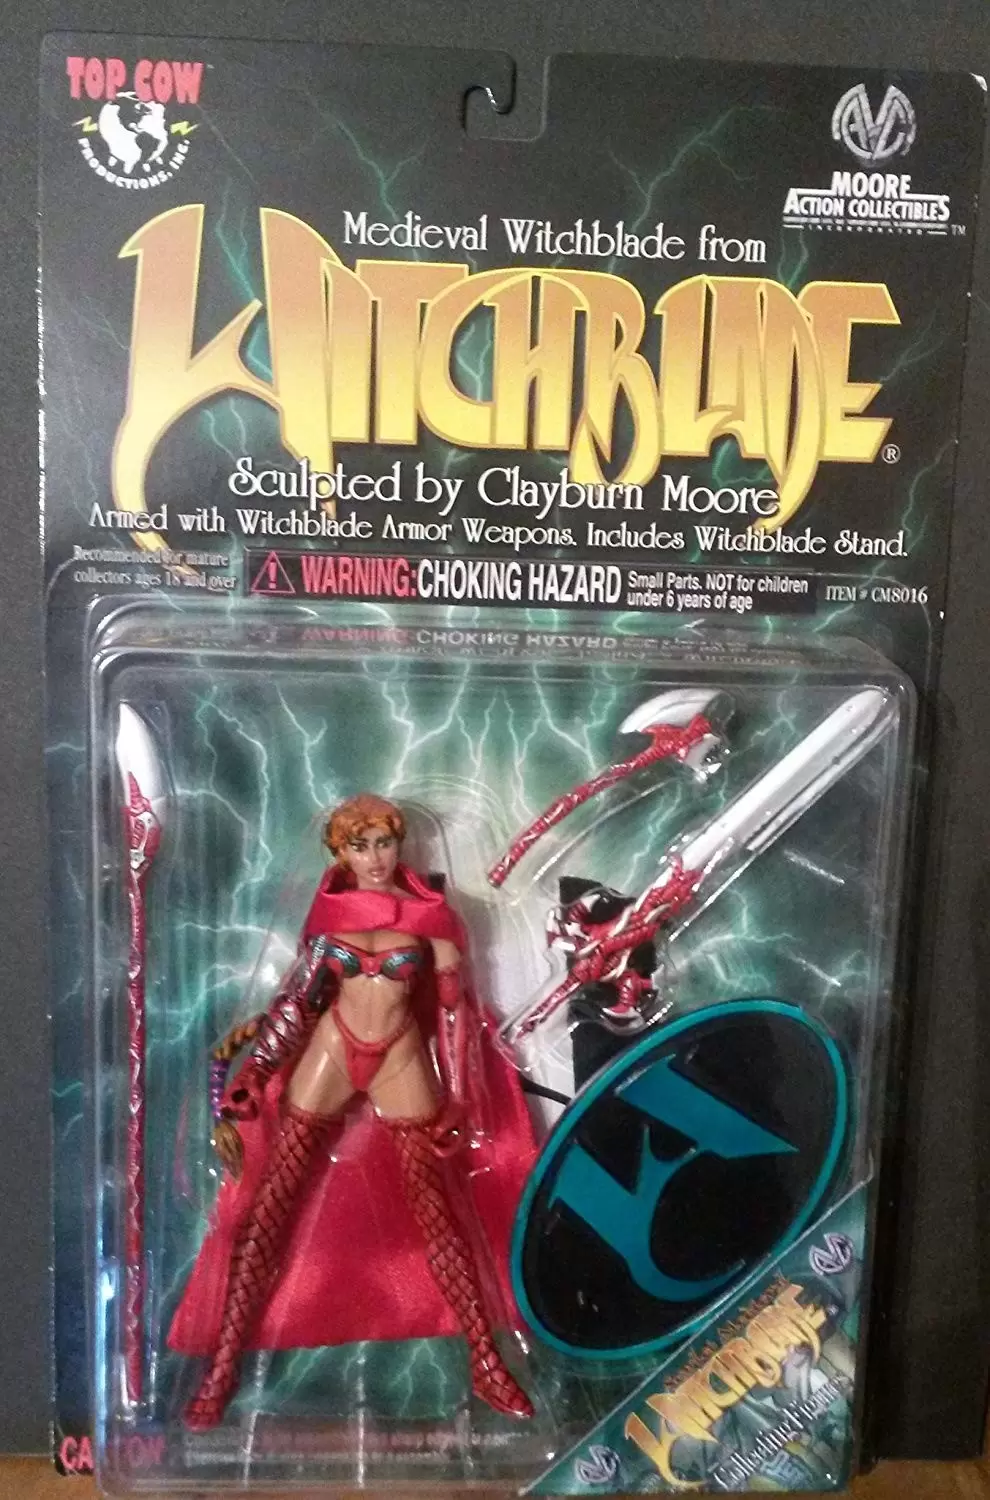 Moore Action Collectibles Witchblade Silver Nottingham action figure New! 